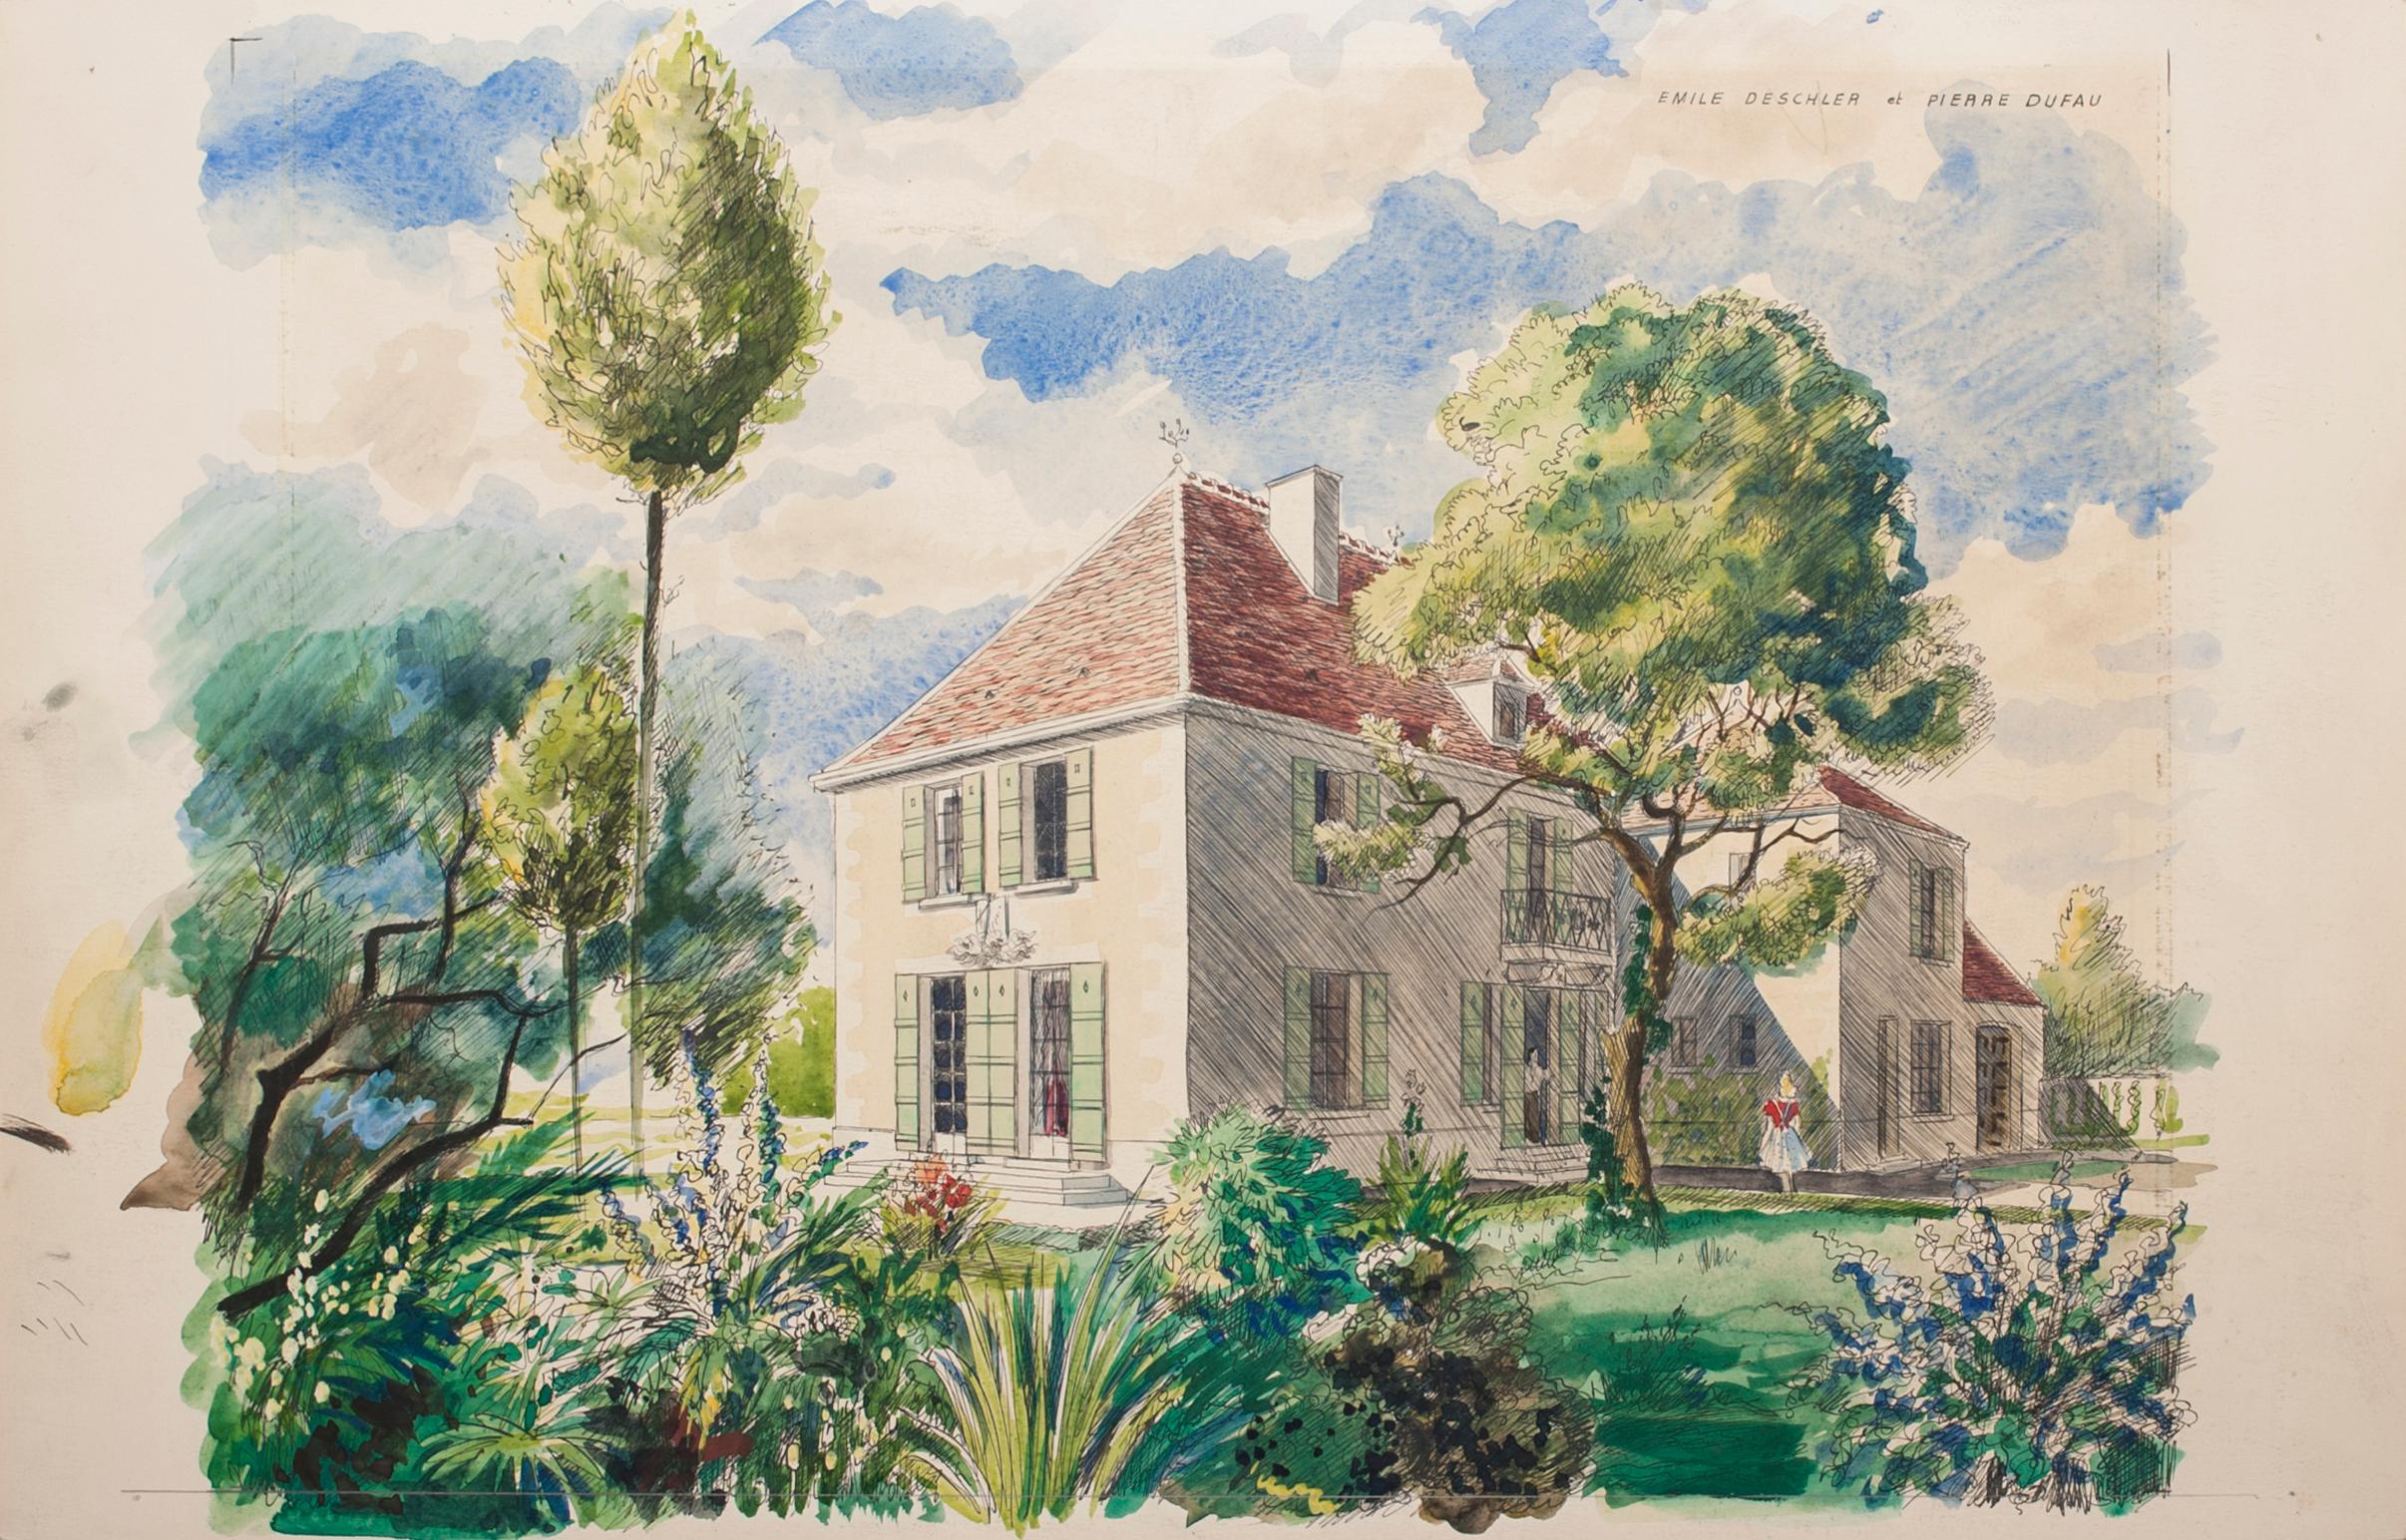 Homes is an original artwork realized during the 1970s by Emile Deschler and Pierre Dufau.

Pen and watercolor drawing on cardboard. Mounted on cardboard.

Very good conditions.

Pierre Dufau (1908 – 1985) was a French architect. He is well-known